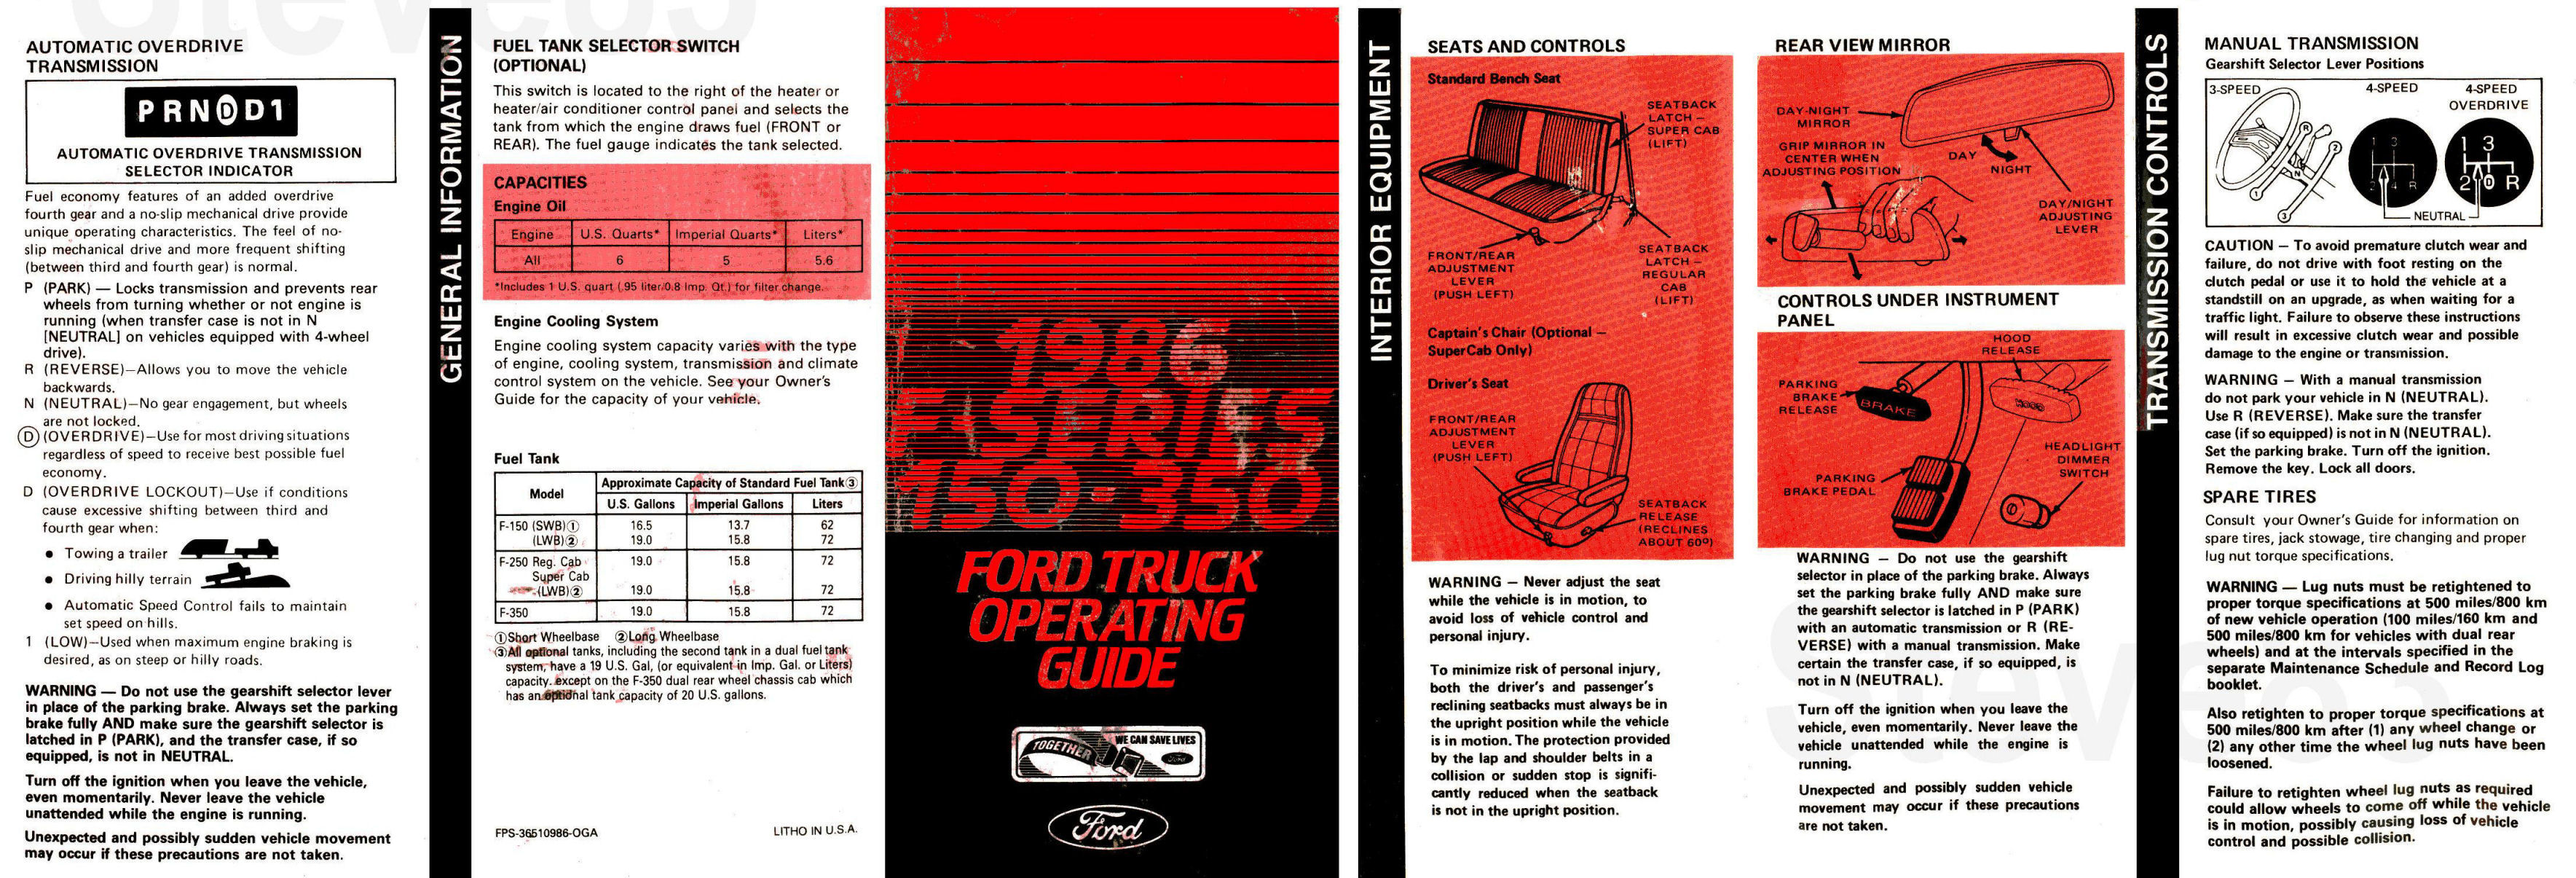 1986_Ford_F-150_Operating_Guide-01